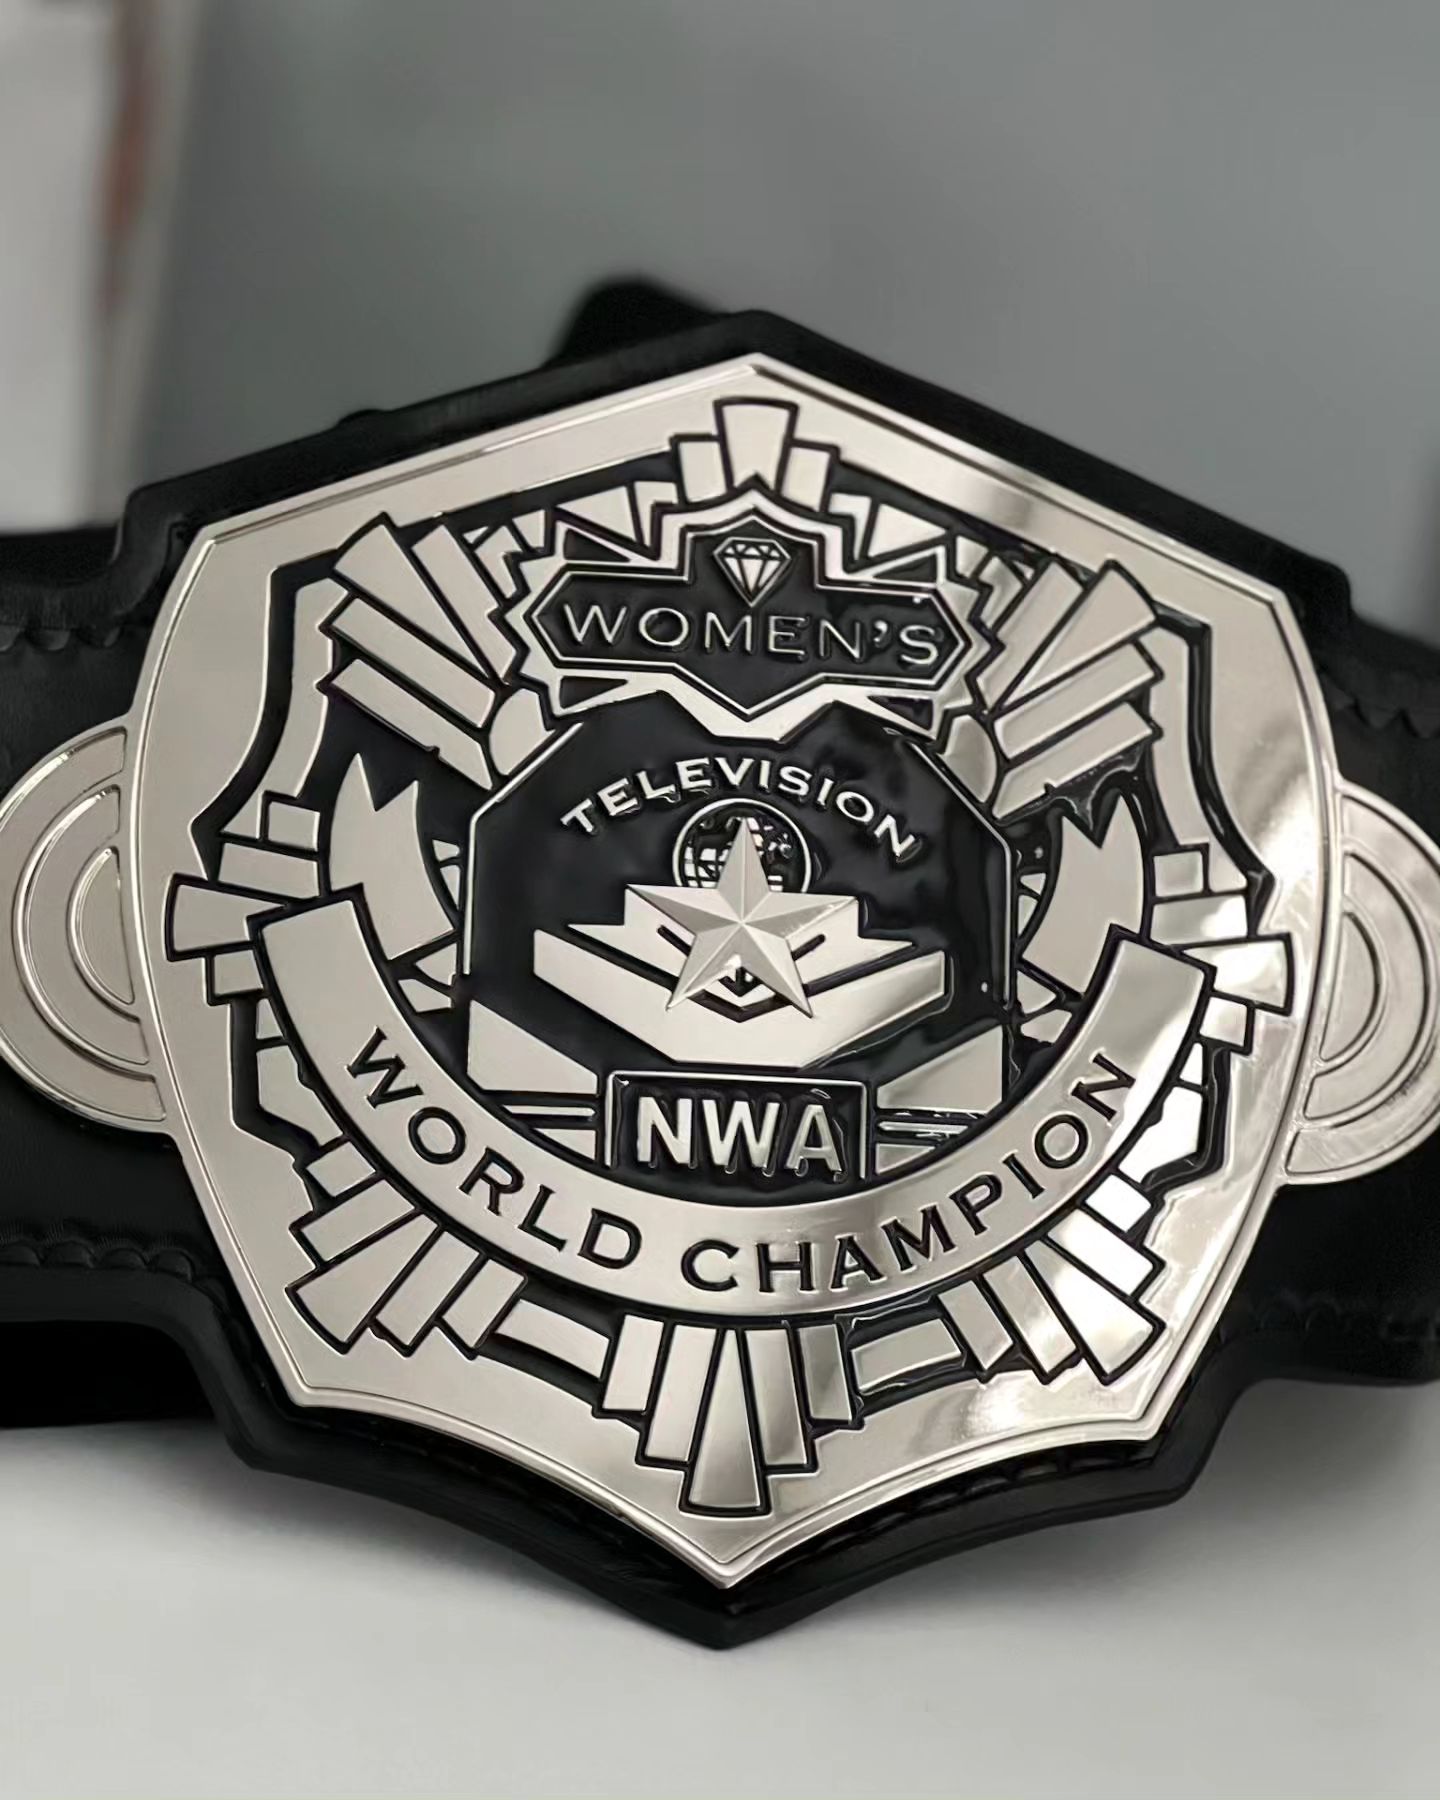 First Photos Revealed of the New NWA World Women's Television Title